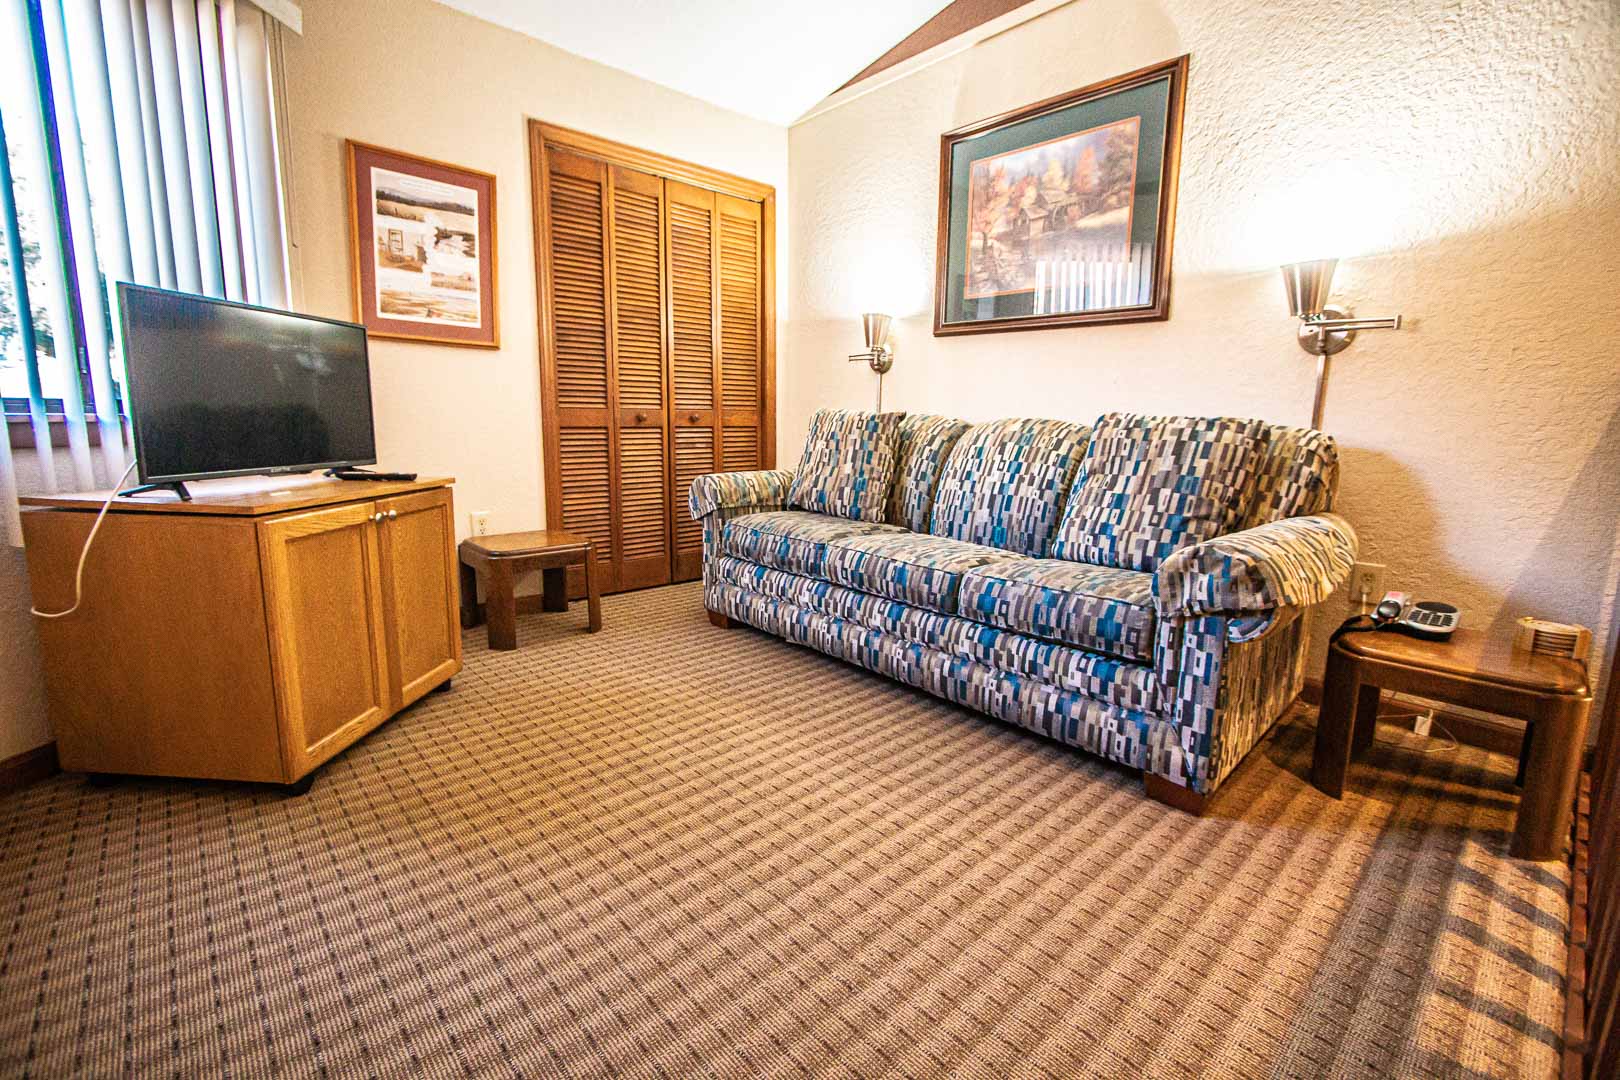 An expansive living room area at VRI's Fairways of the Mountains in North Carolina